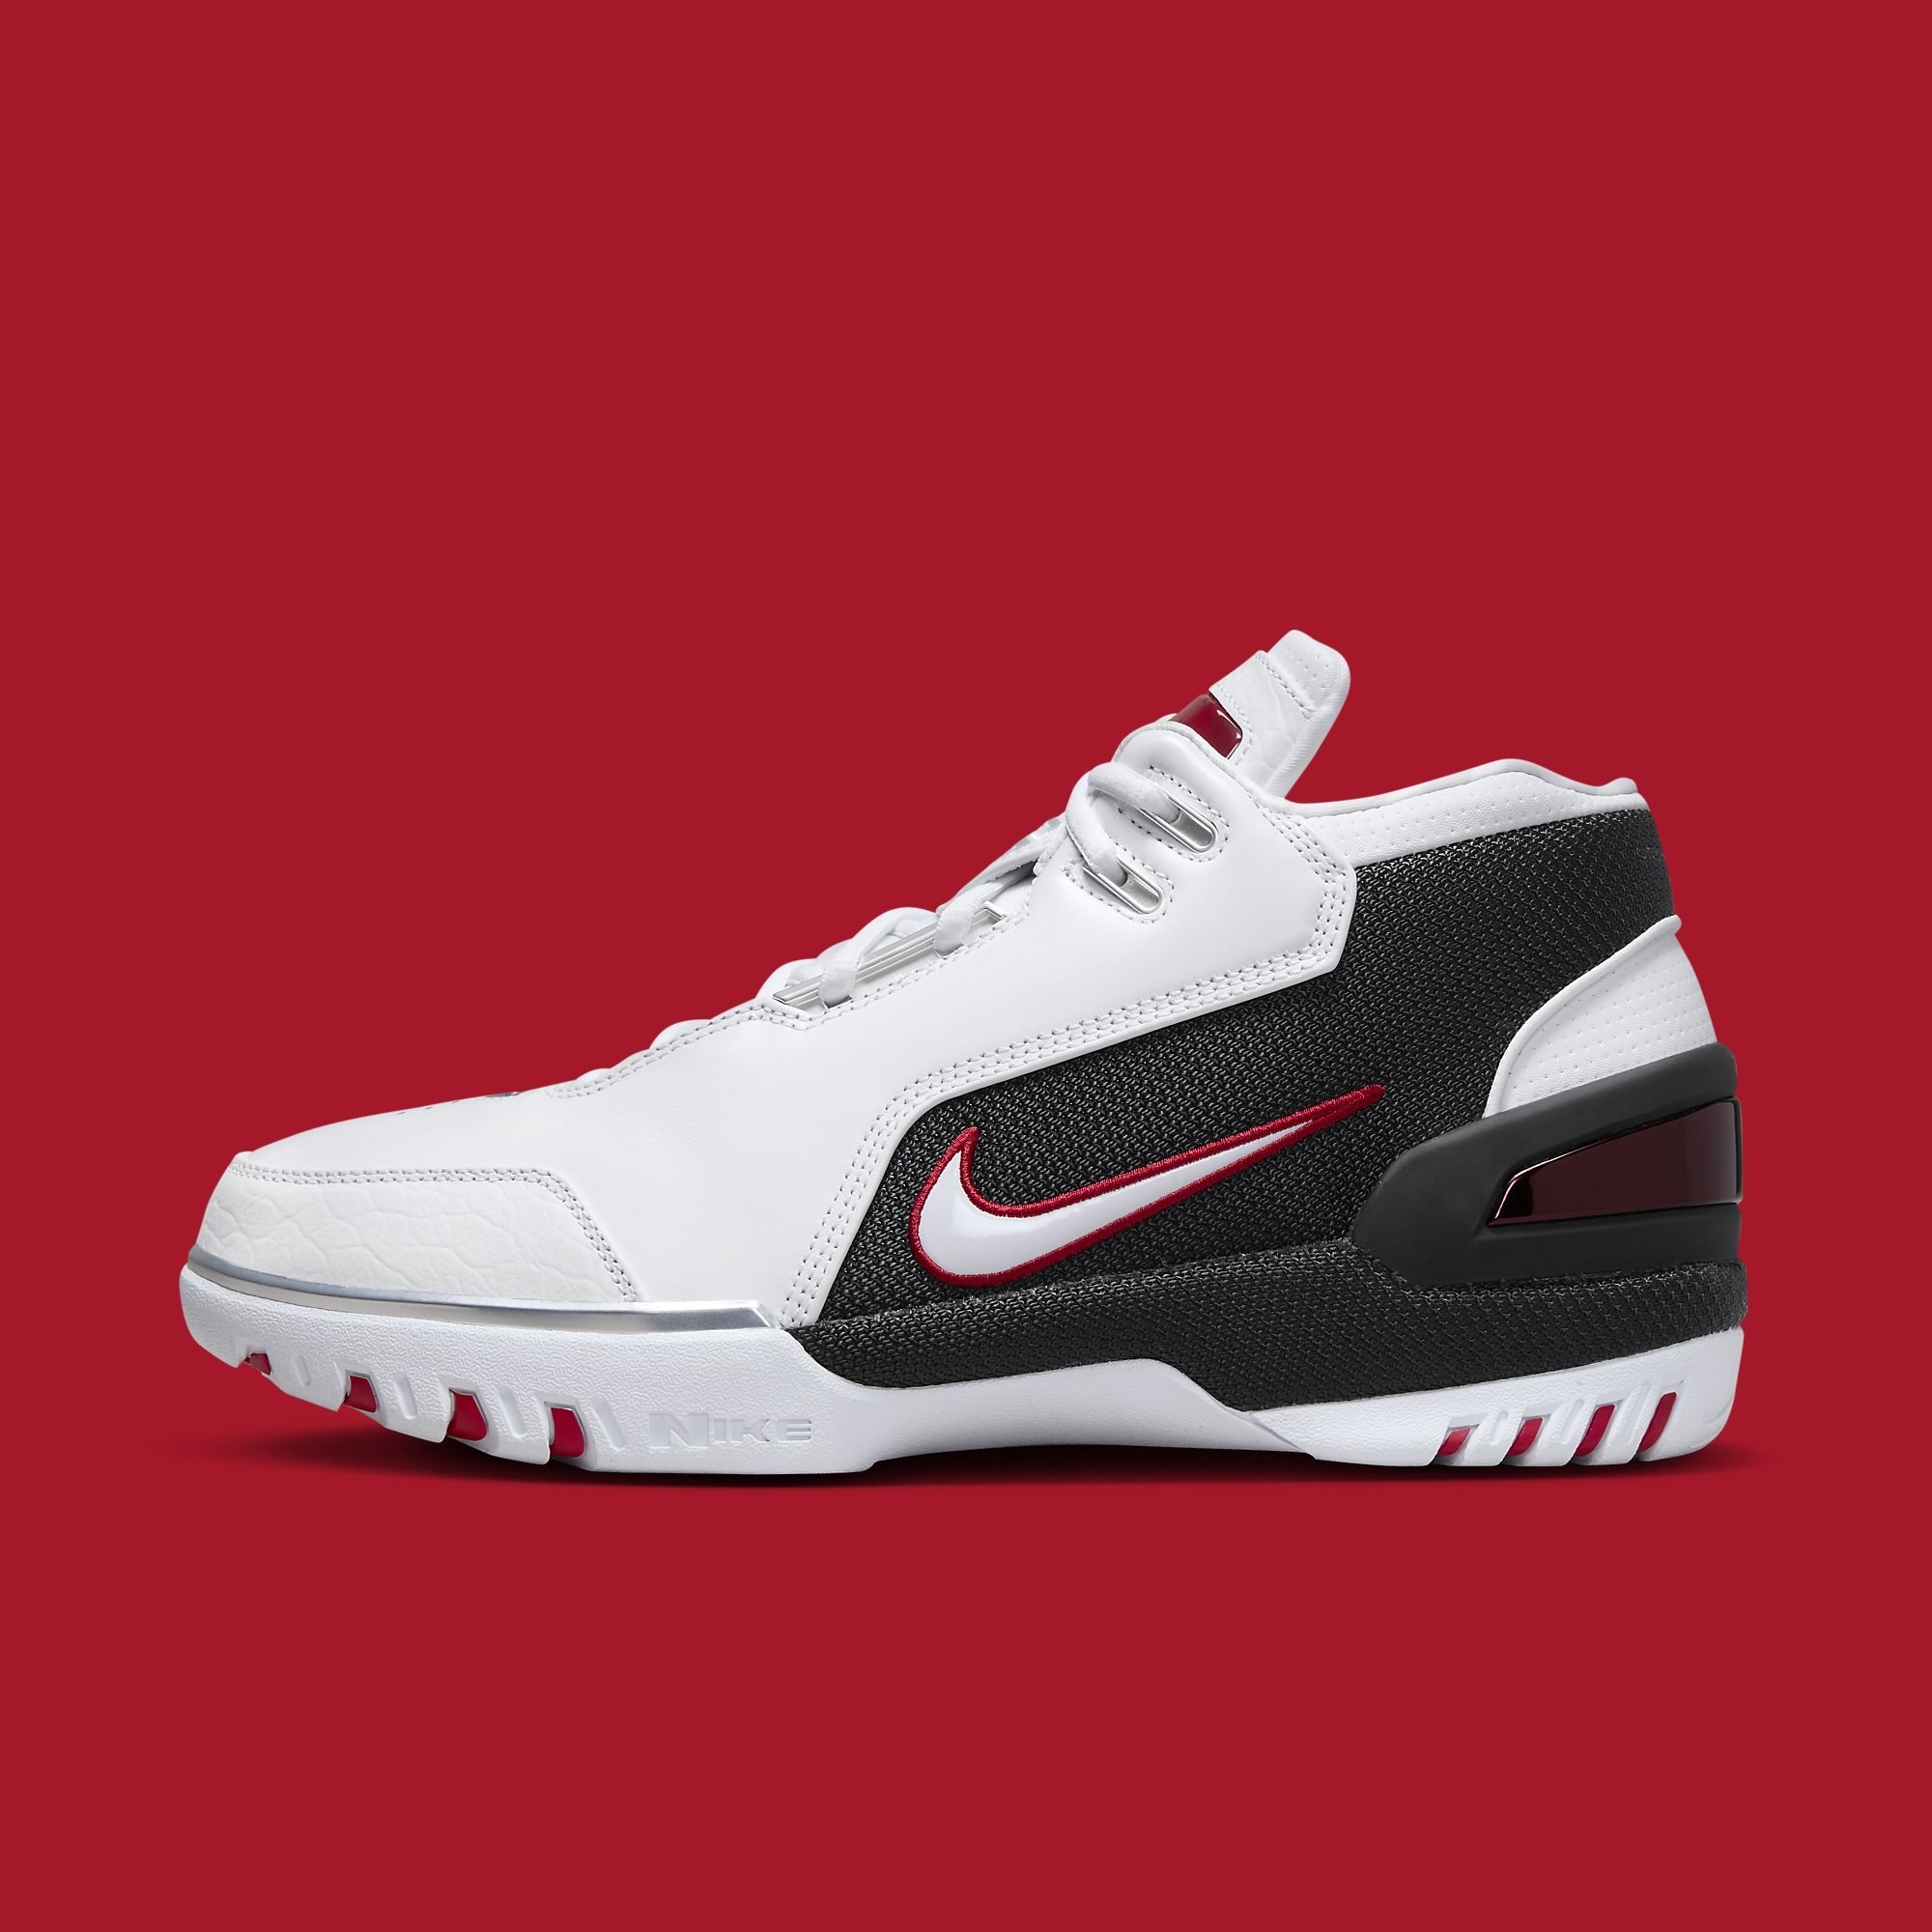 Nike Air Zoom Generation 'Debut' DV7219-100 Release Date | Complex